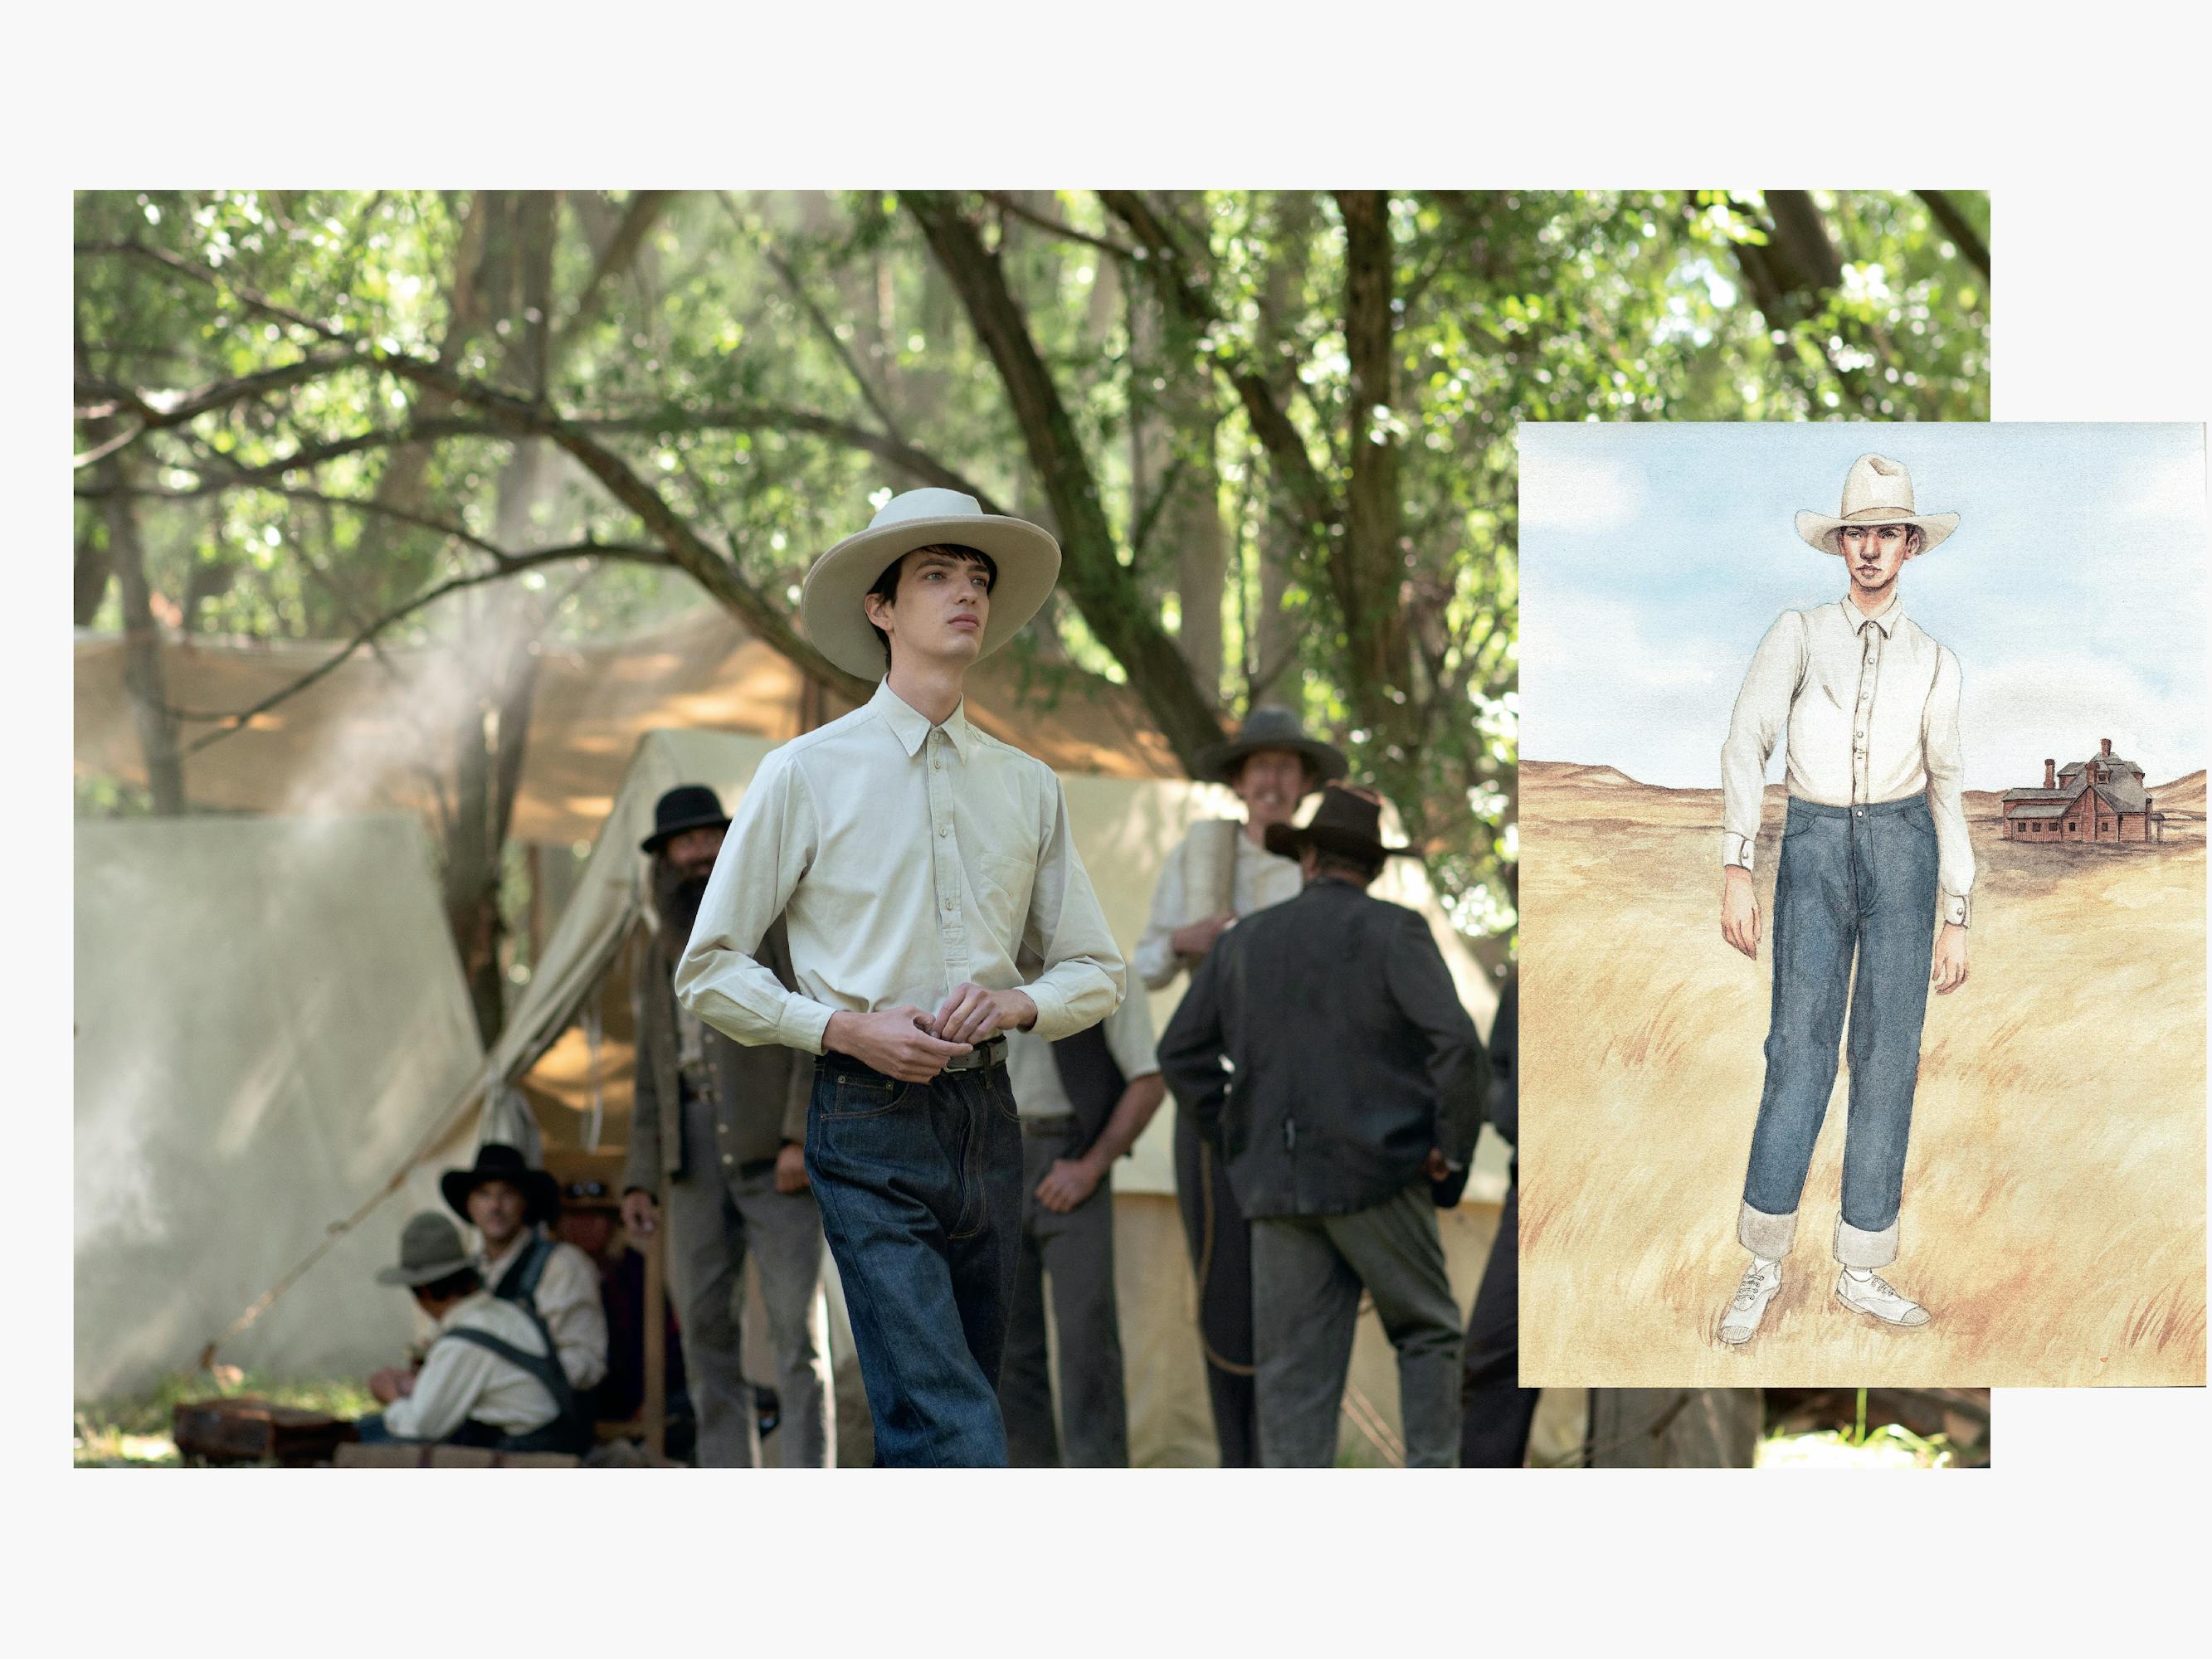 Kodi Smit-McPhee wears a white shirt, grey slacks, and a white hat. He stands amidst other ranchers in a sunlit-dappled tent scene. To the right is a sketch of Kodi in the same outfit.